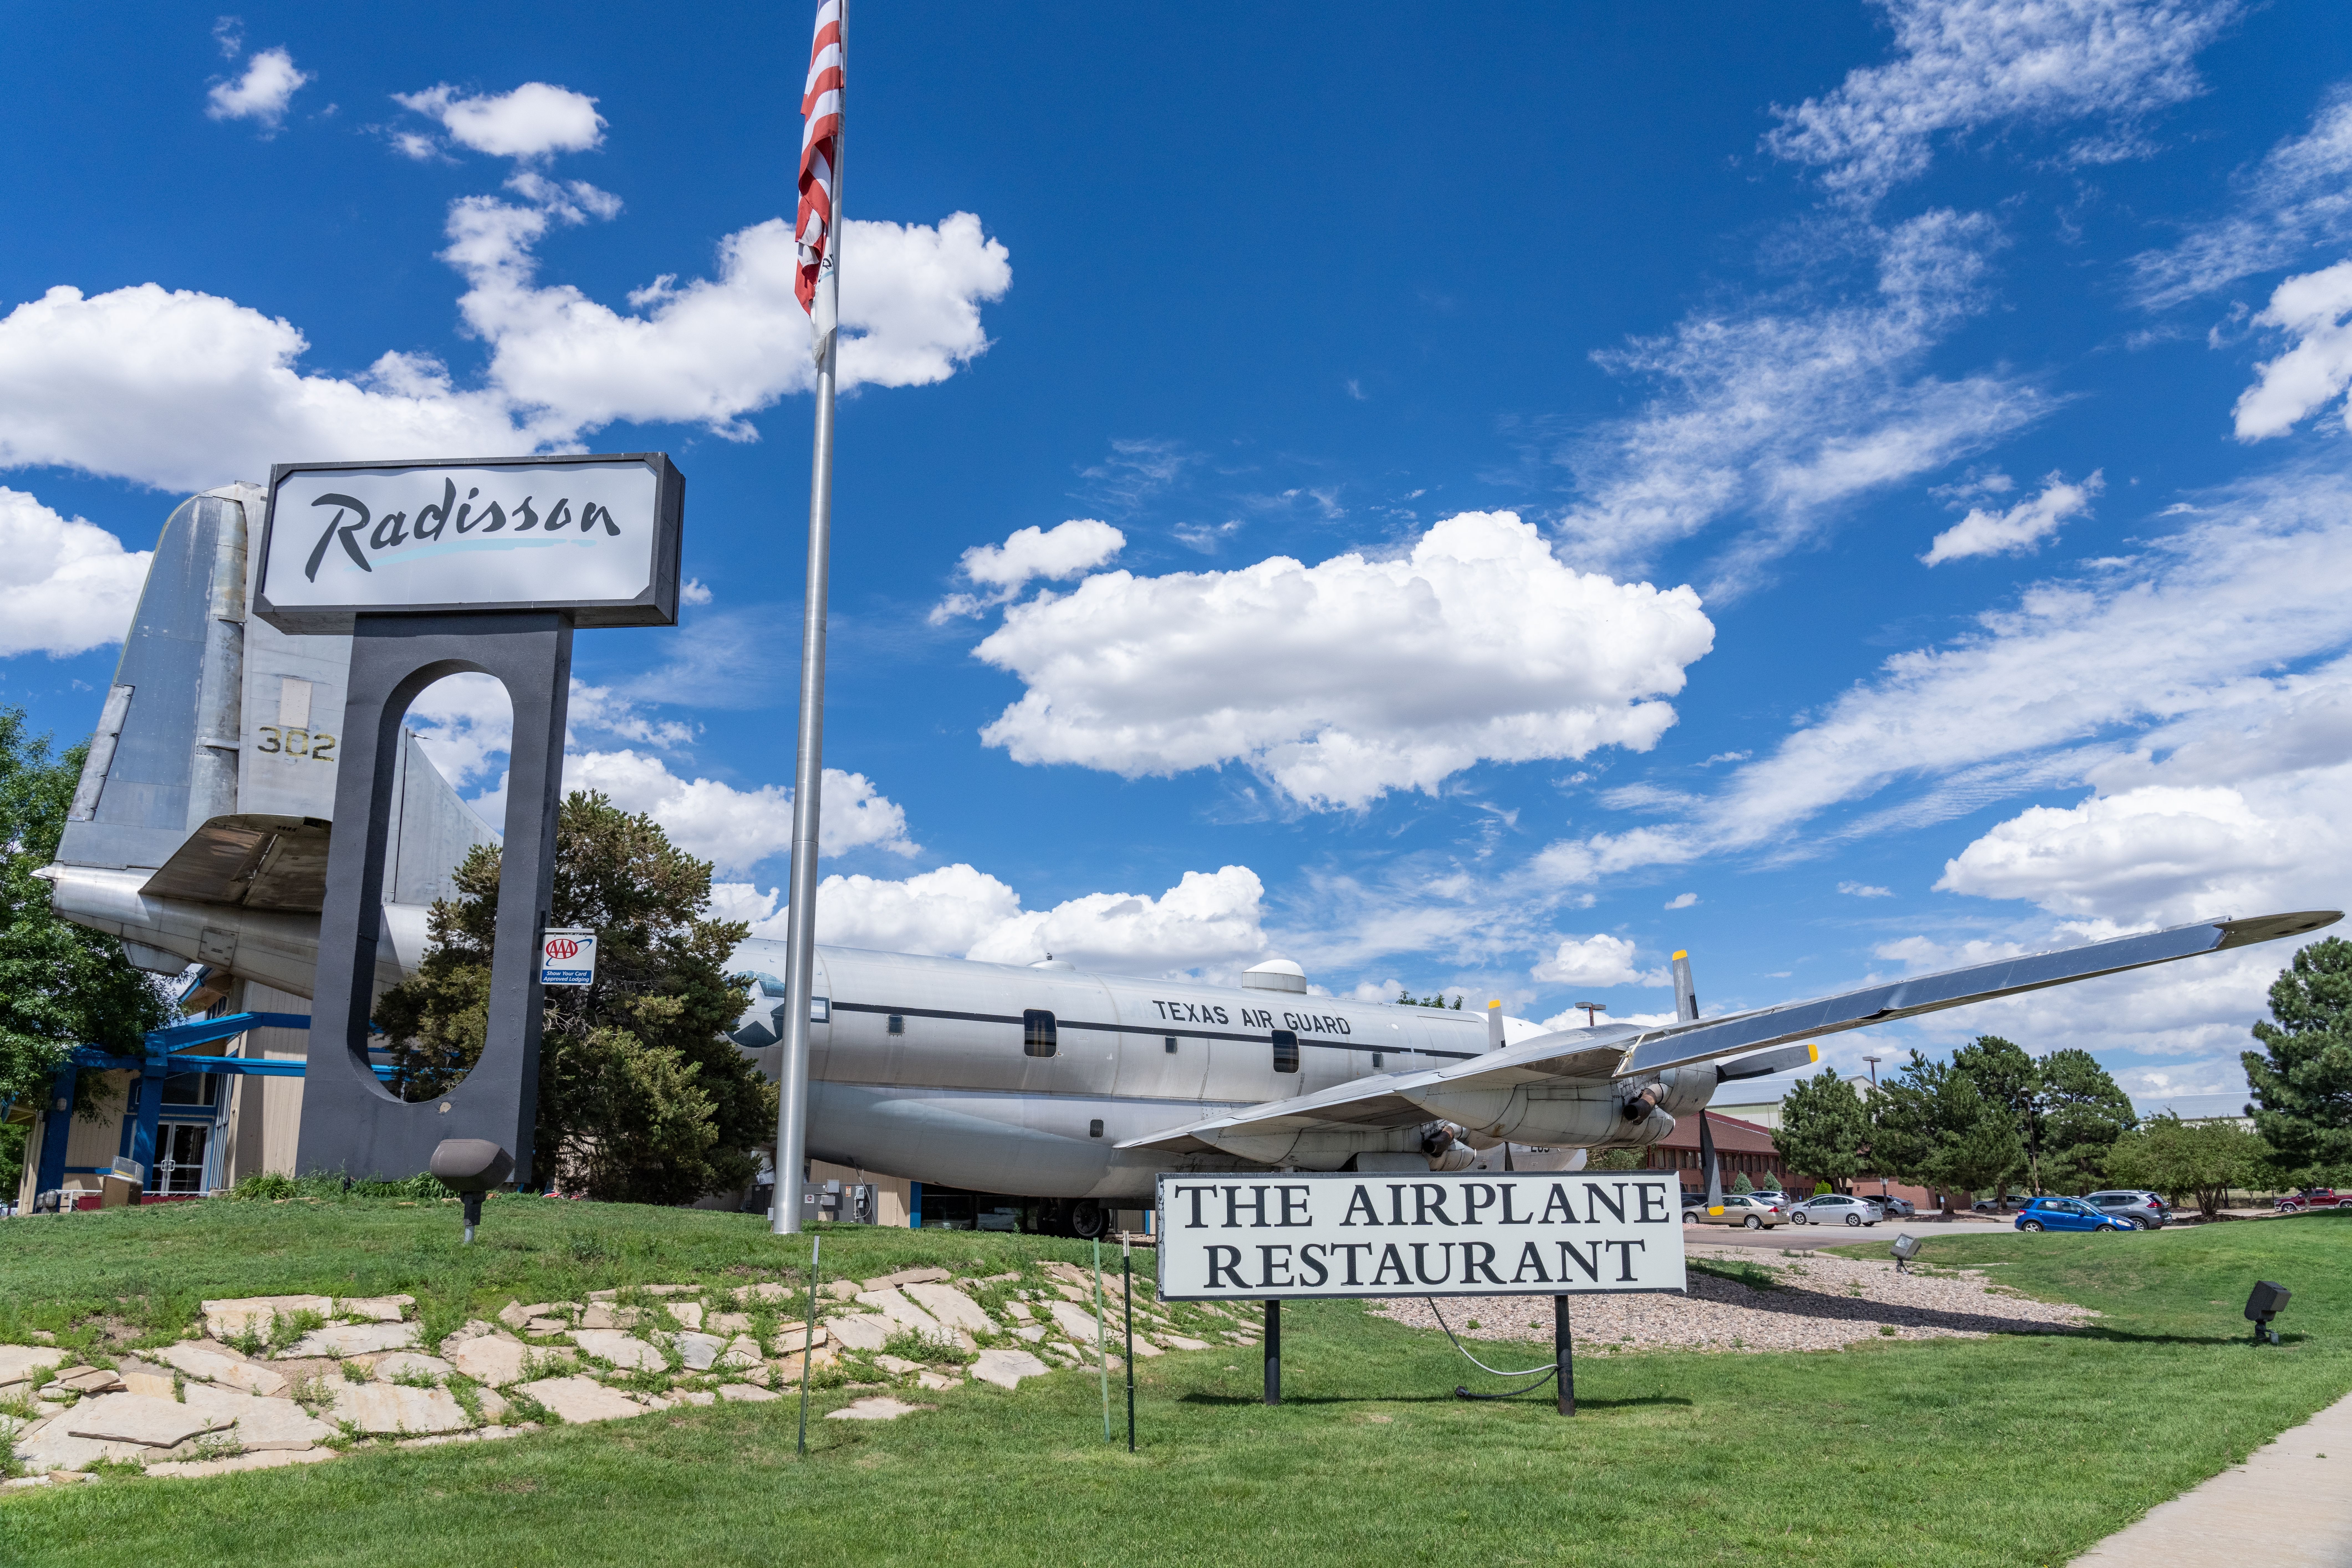 The Boeing KC-97 parked at the airplane Restaurant in Colorado Springs.